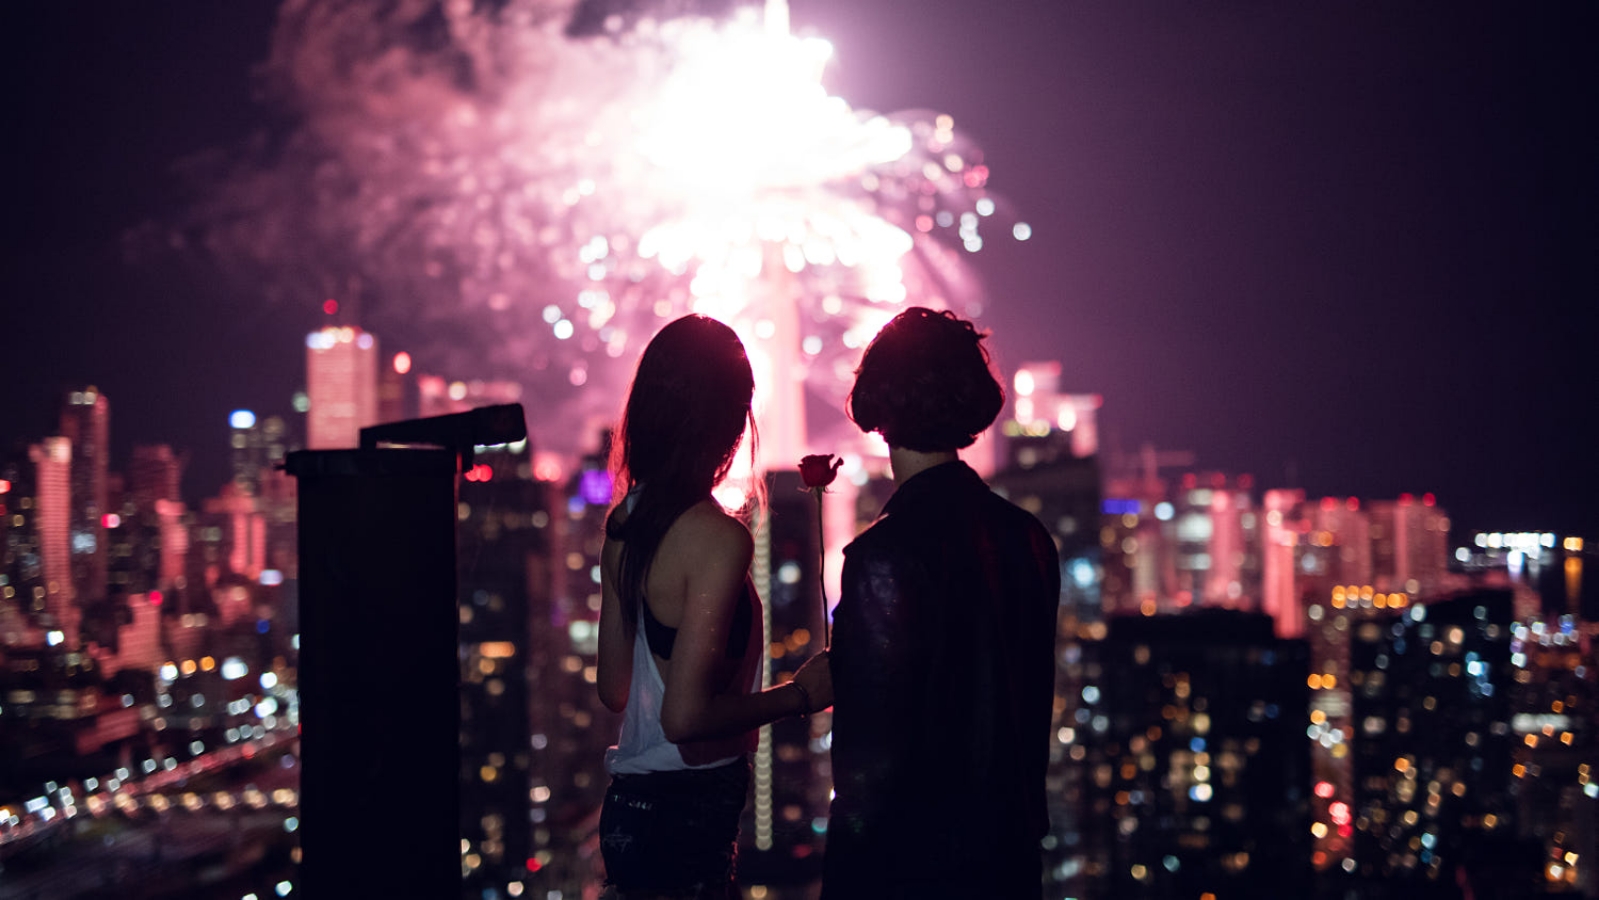 General 1599x900 people cityscape night women couple city lights fireworks